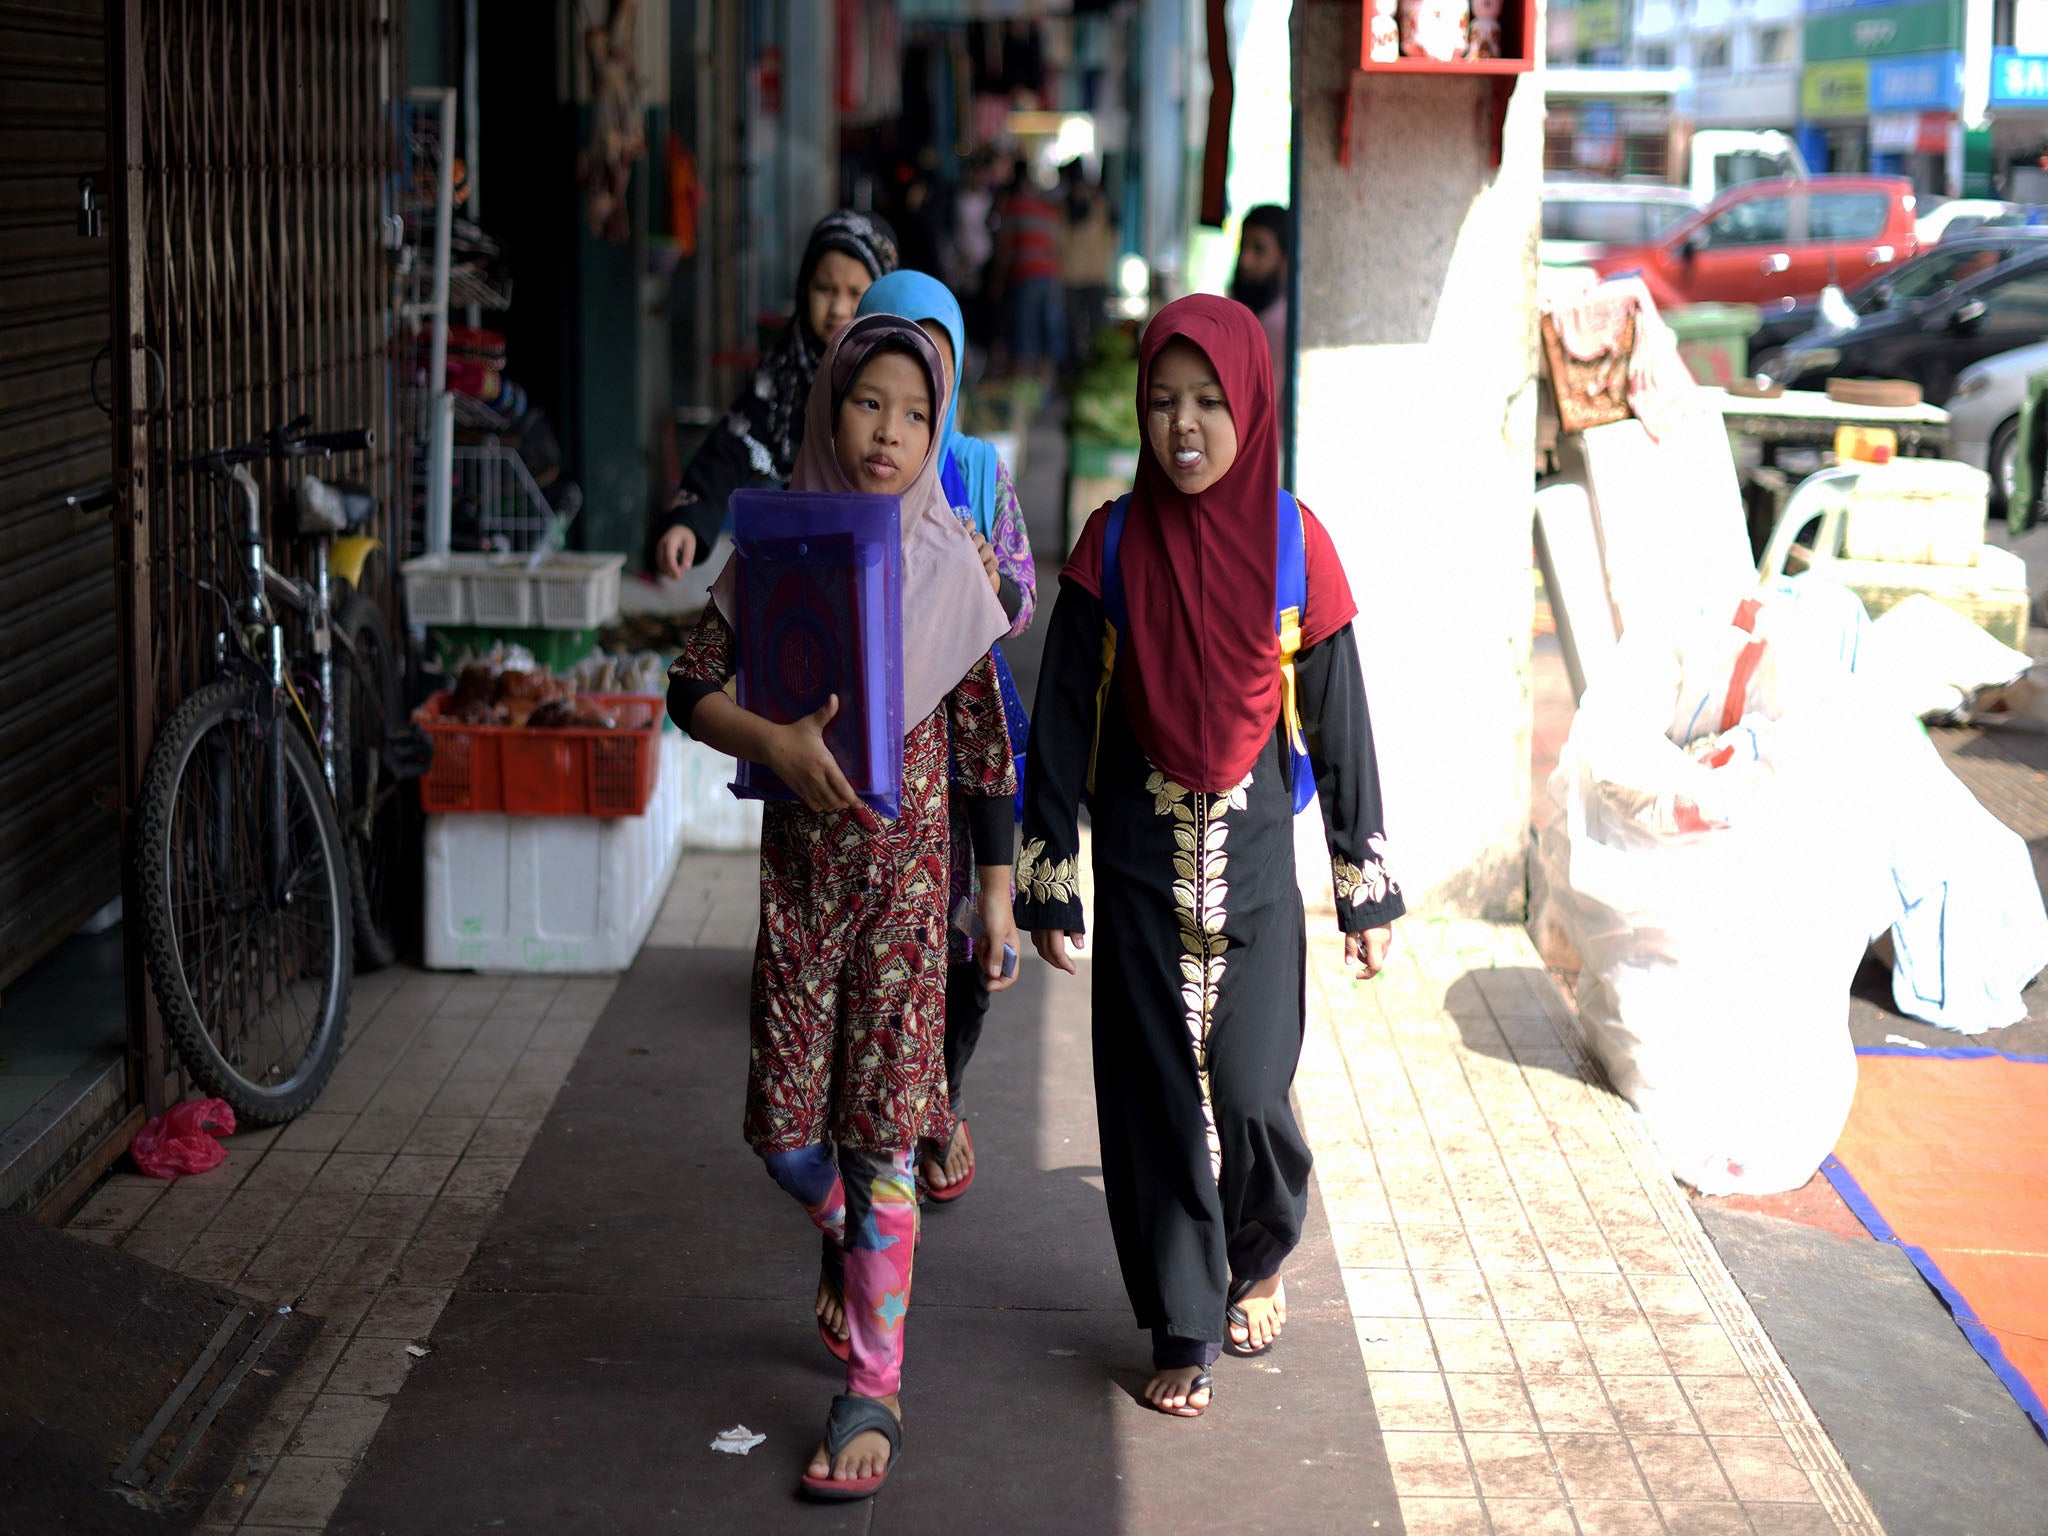 Malaysian child rights activists said that about 15,000 girls under 15 were in child marriages in 2010 (File photo)